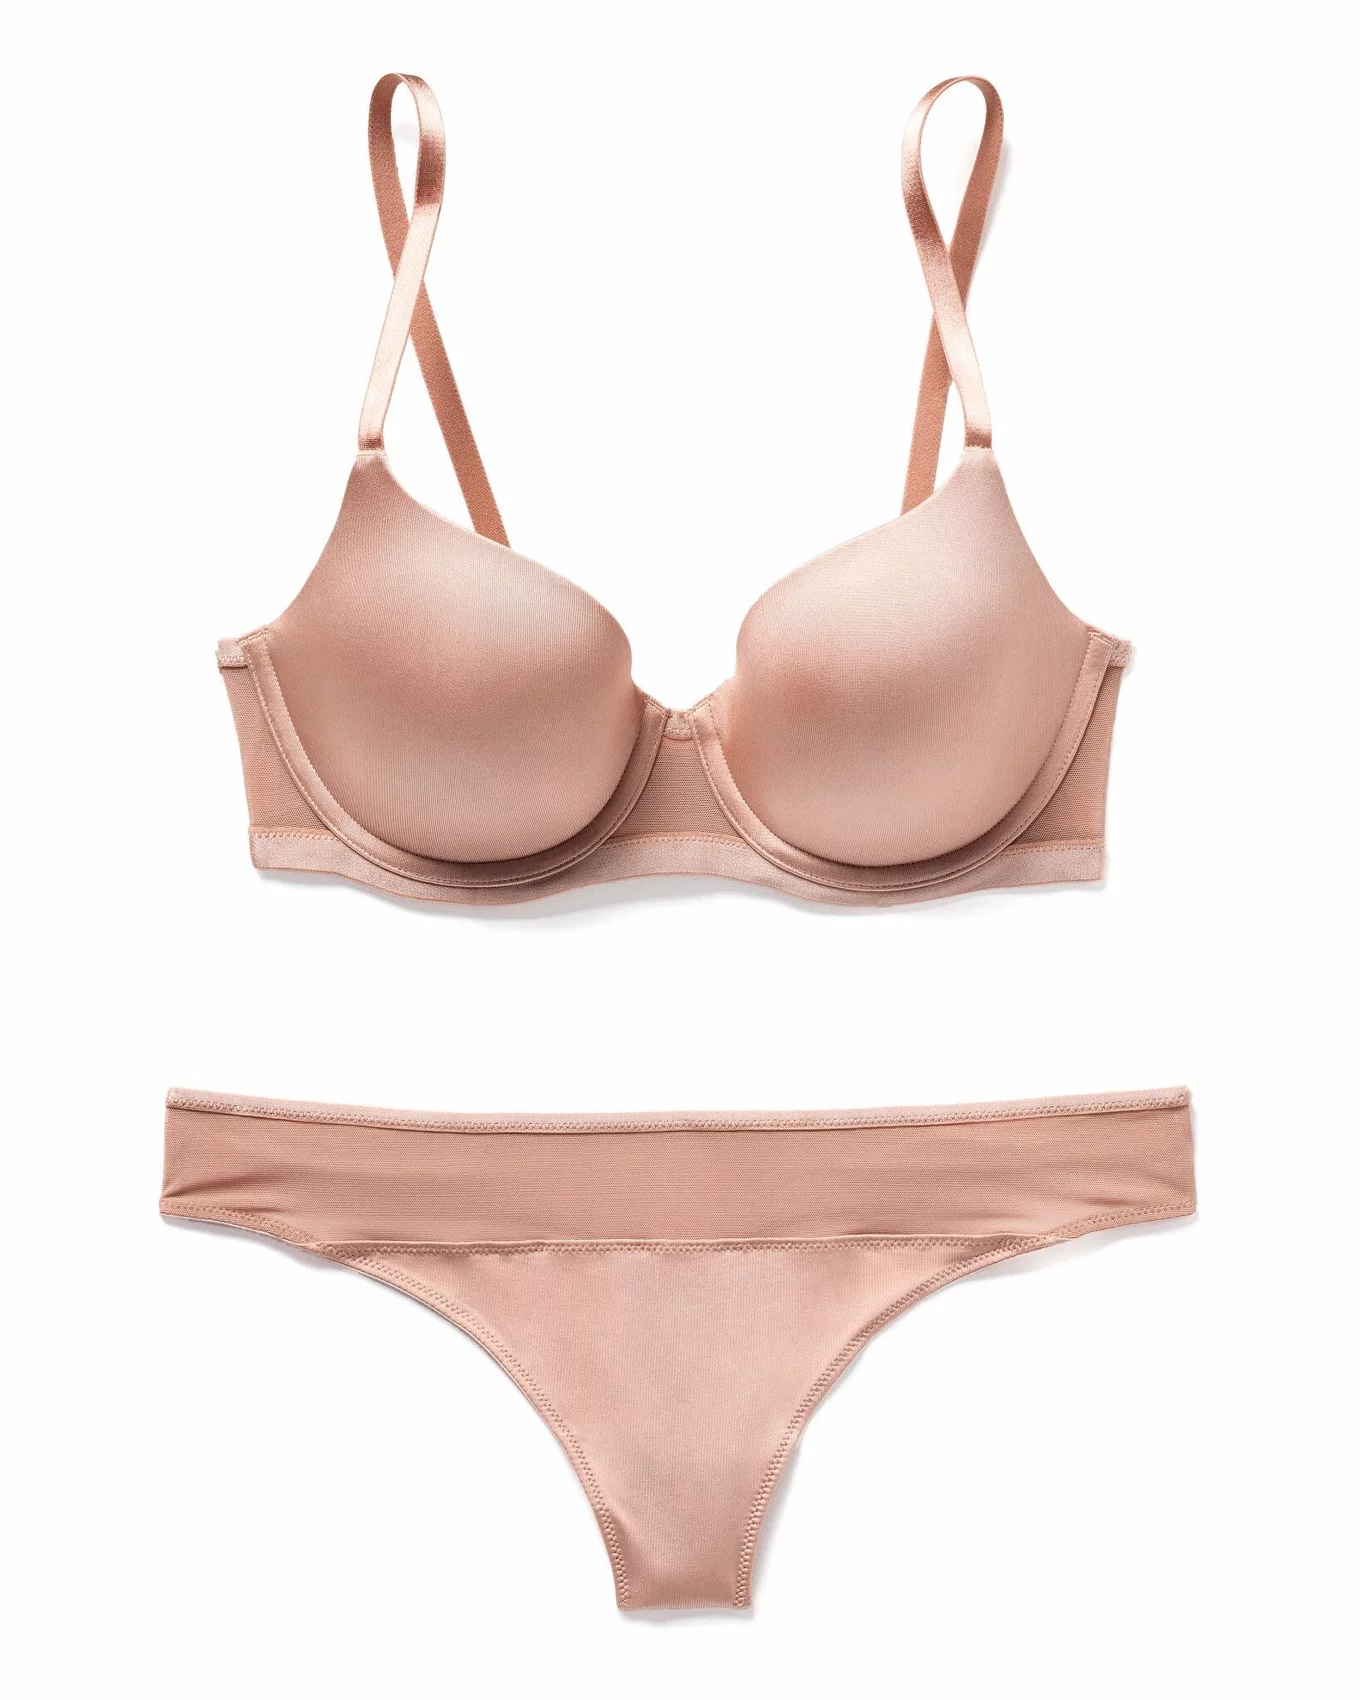 Adore Me Women's Analize Plunge Bra 34a / Tuscany Beige. : Target